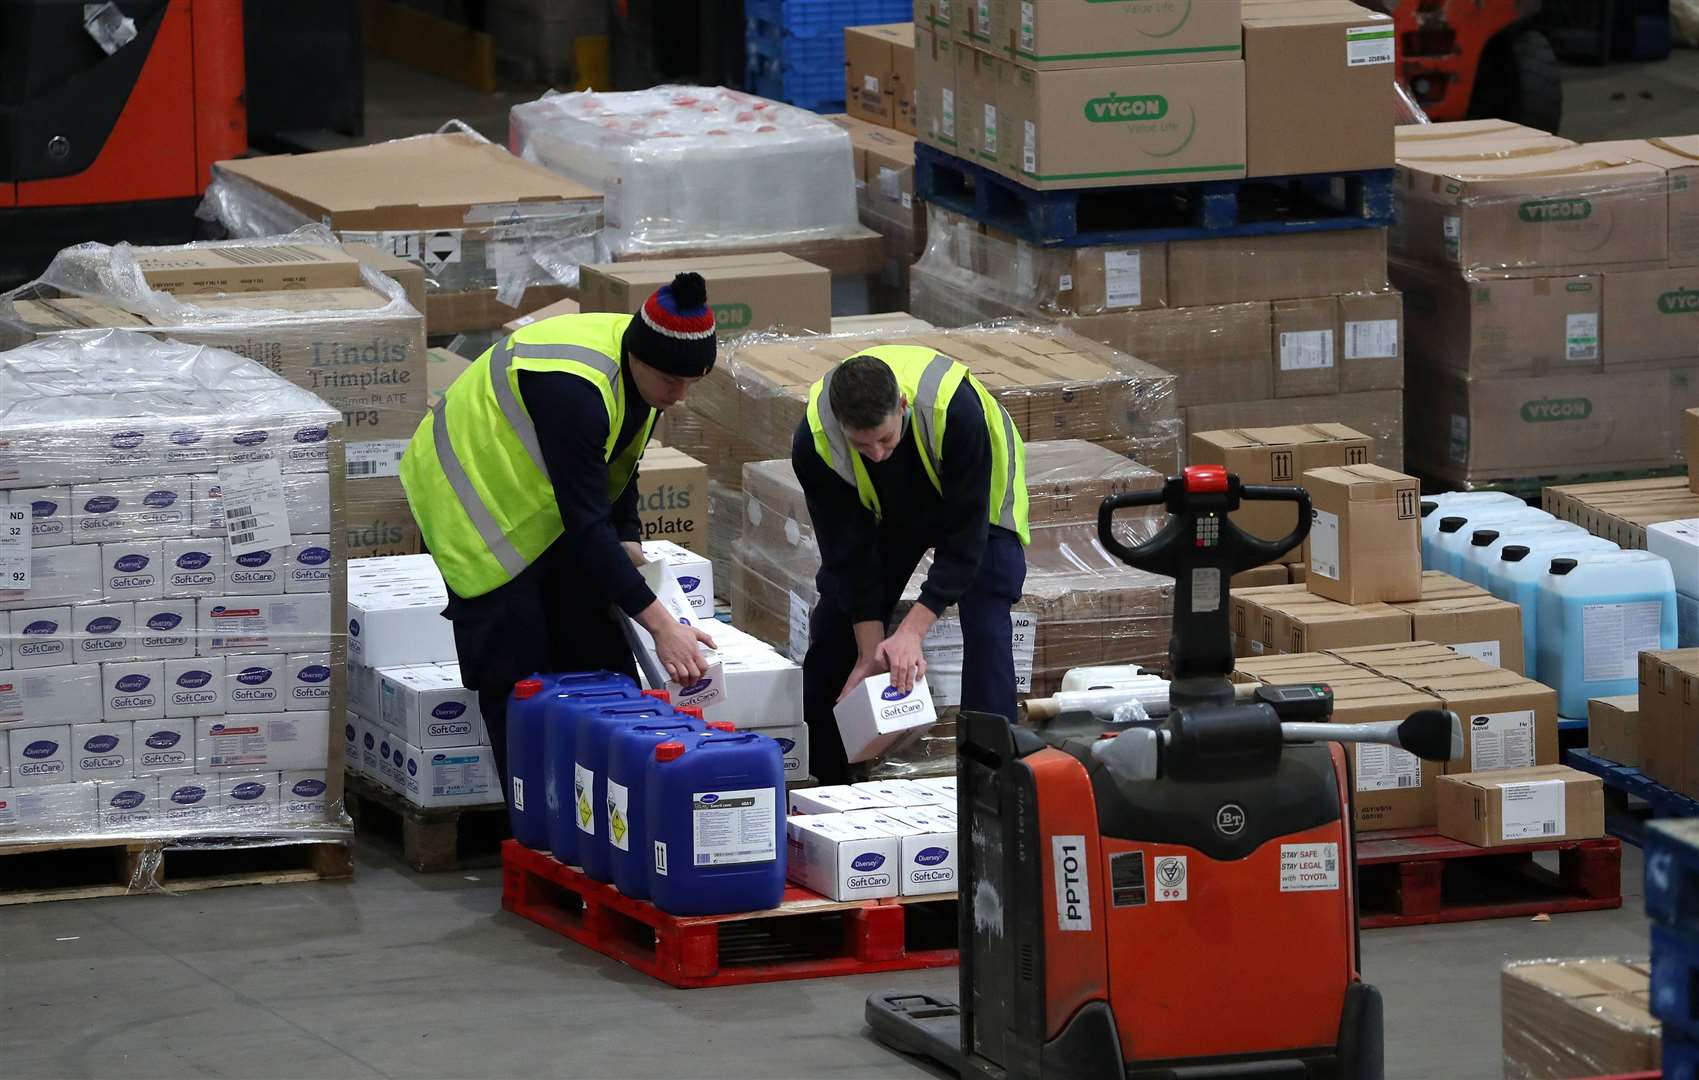 Workers load boxes with supplies at a storage facility in Scotland as part of Brexit preparations (Andrew Milligan/PA)